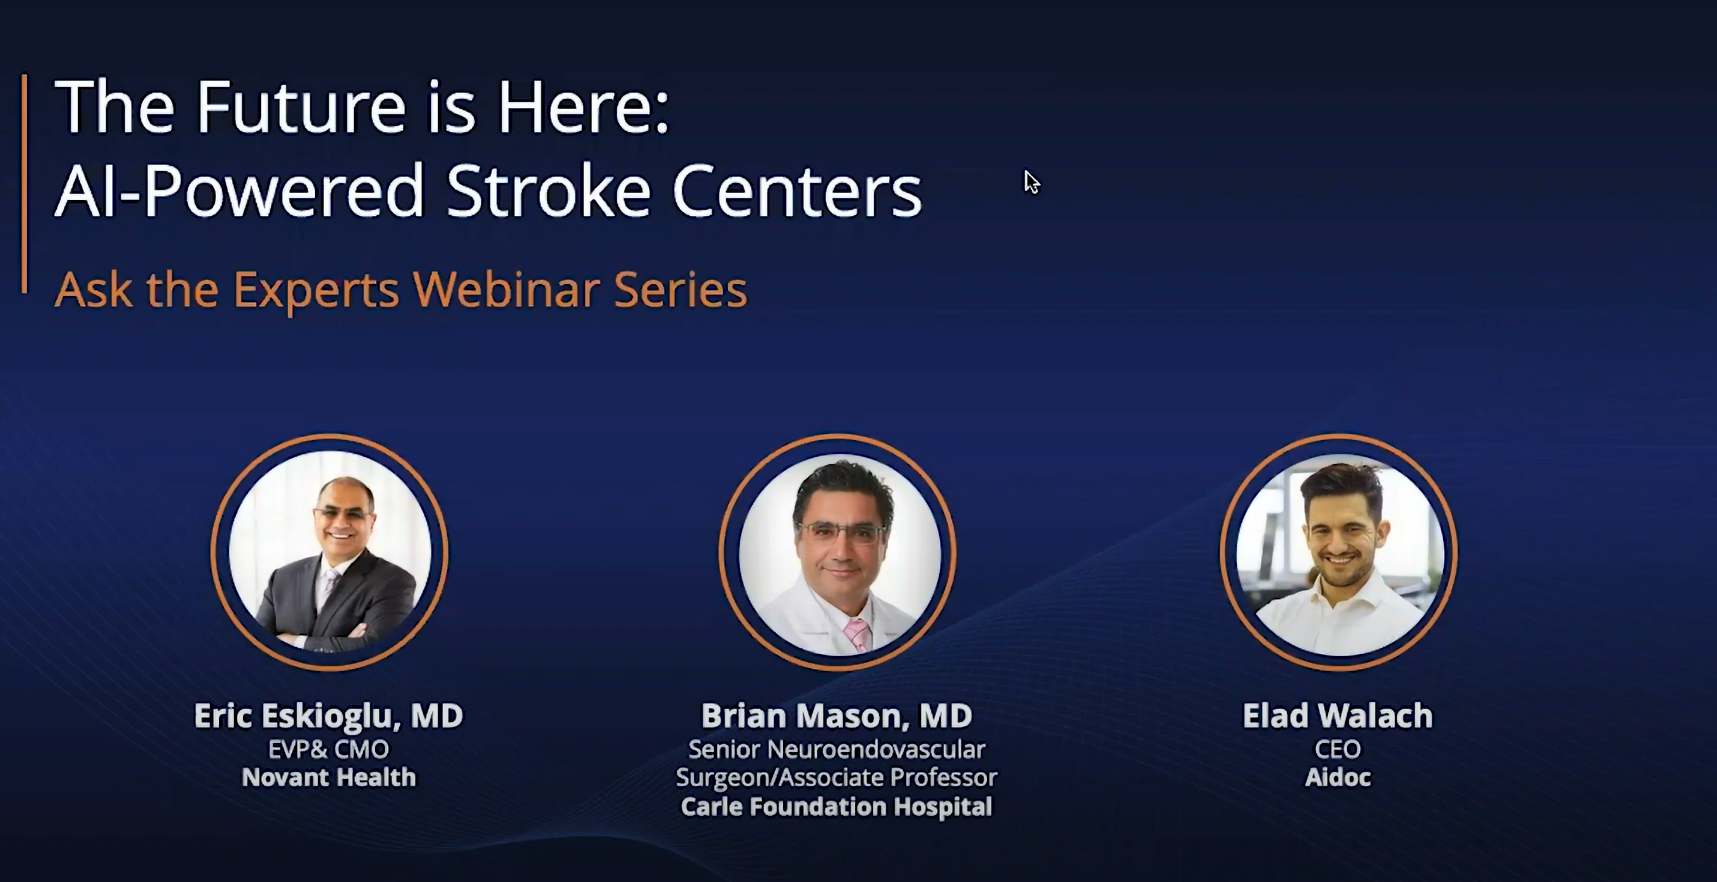 Webinar series banner ad for AI-powered stroke centers